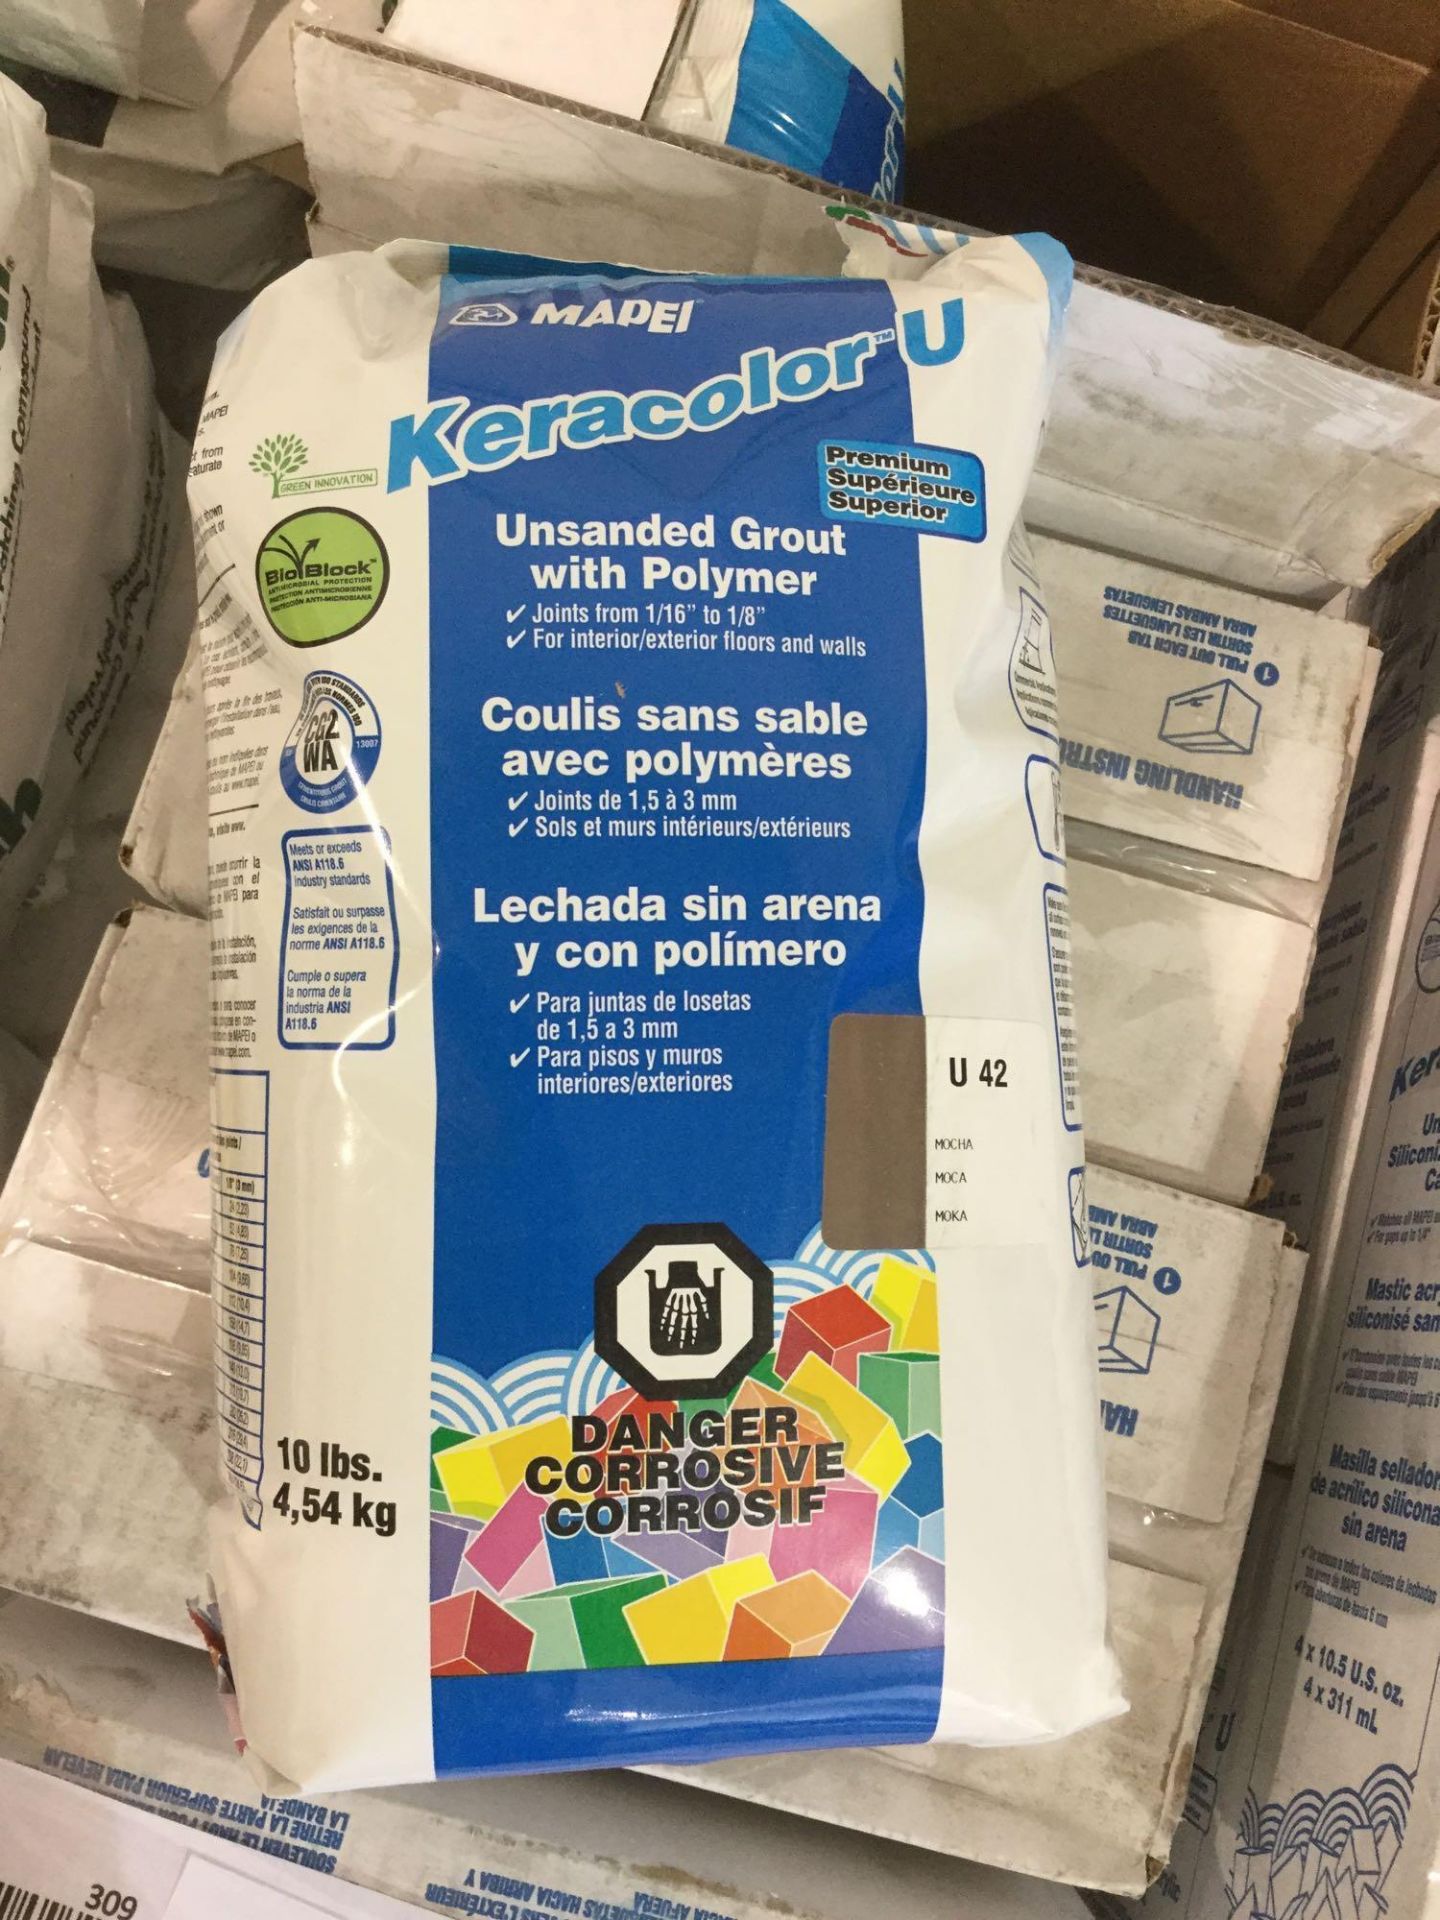 Bag of Mapei Keracolor Unsanded Grout 4.54KG